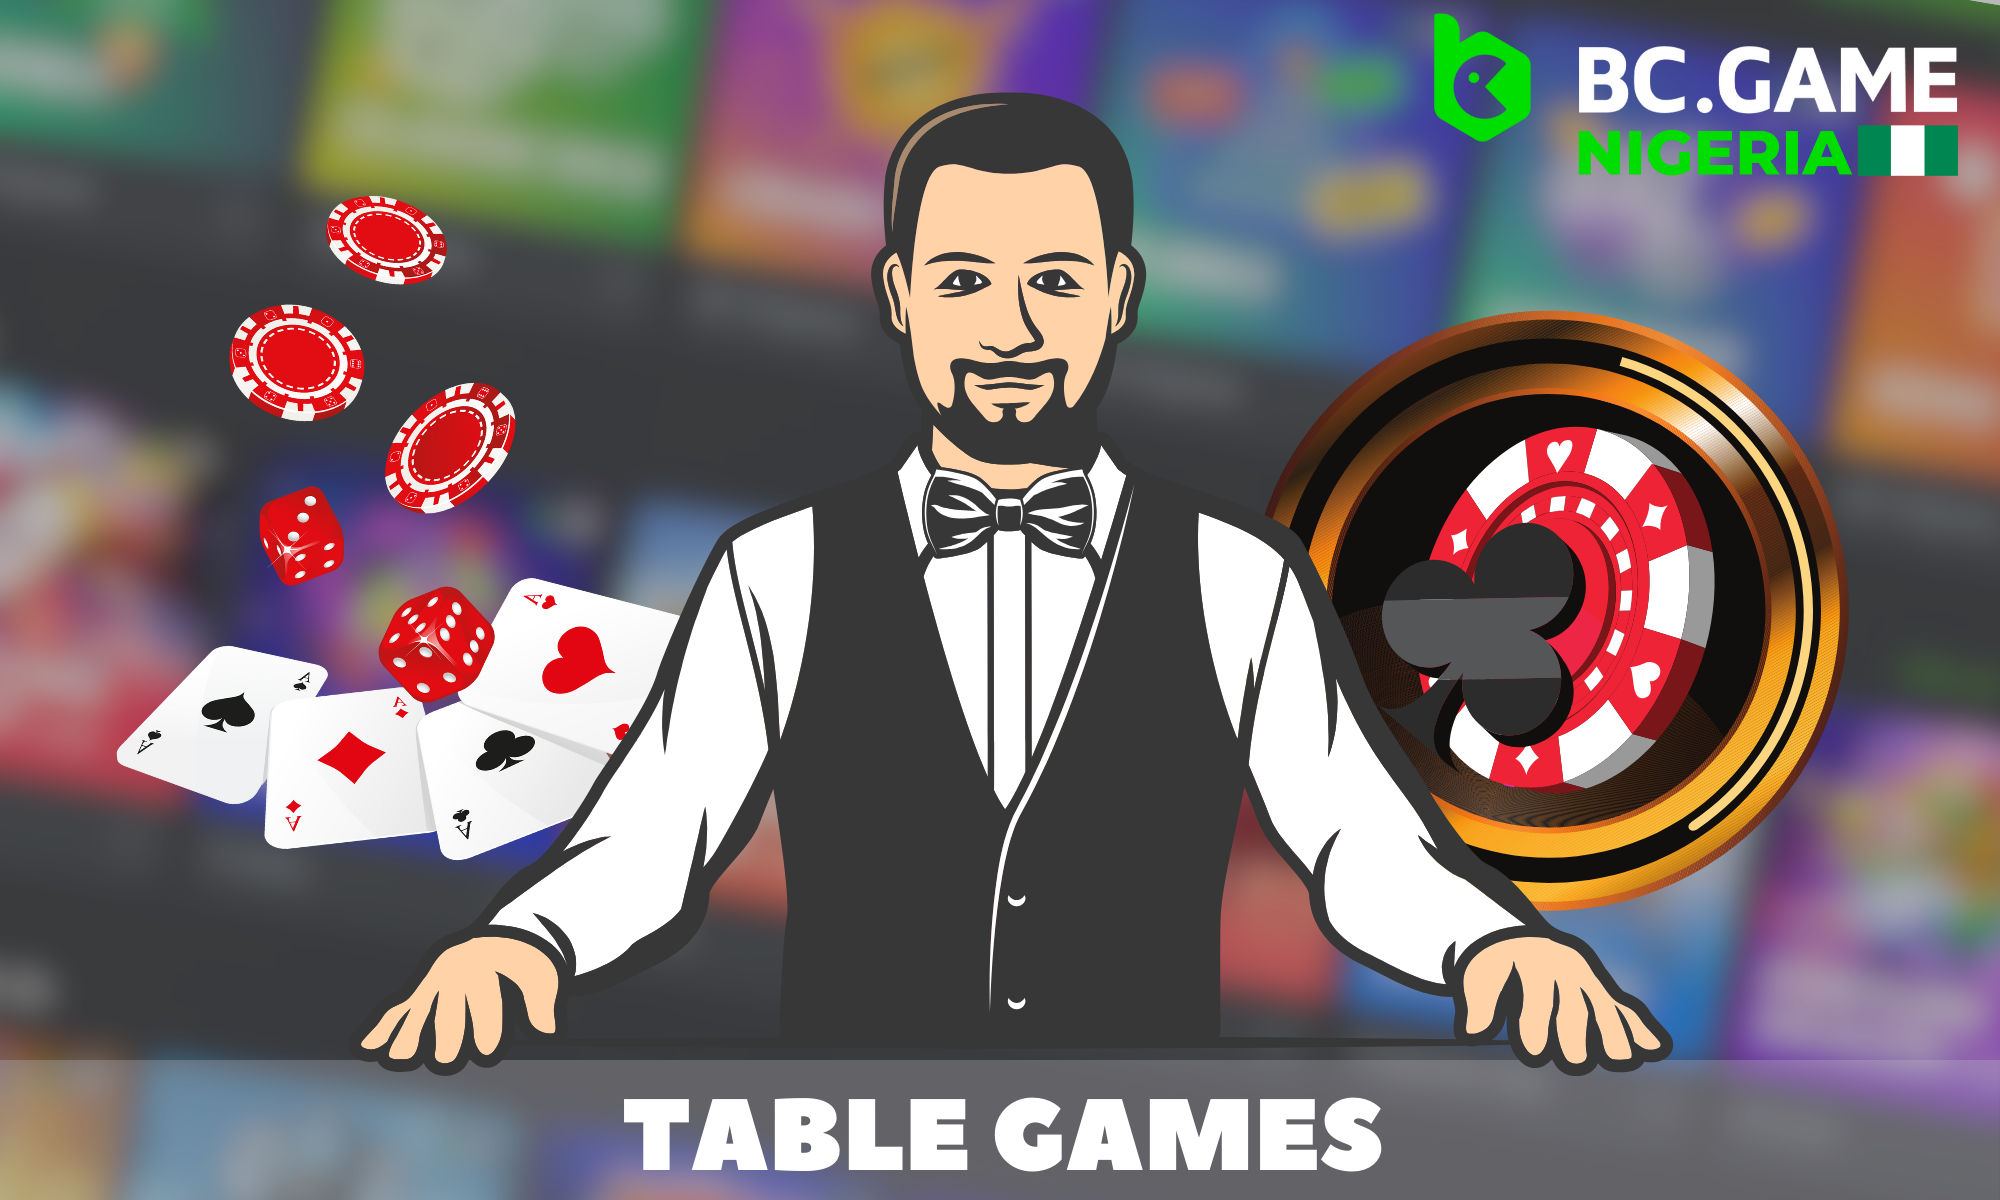 38 table games are currently available on the cryptocurrency casino website BC Game